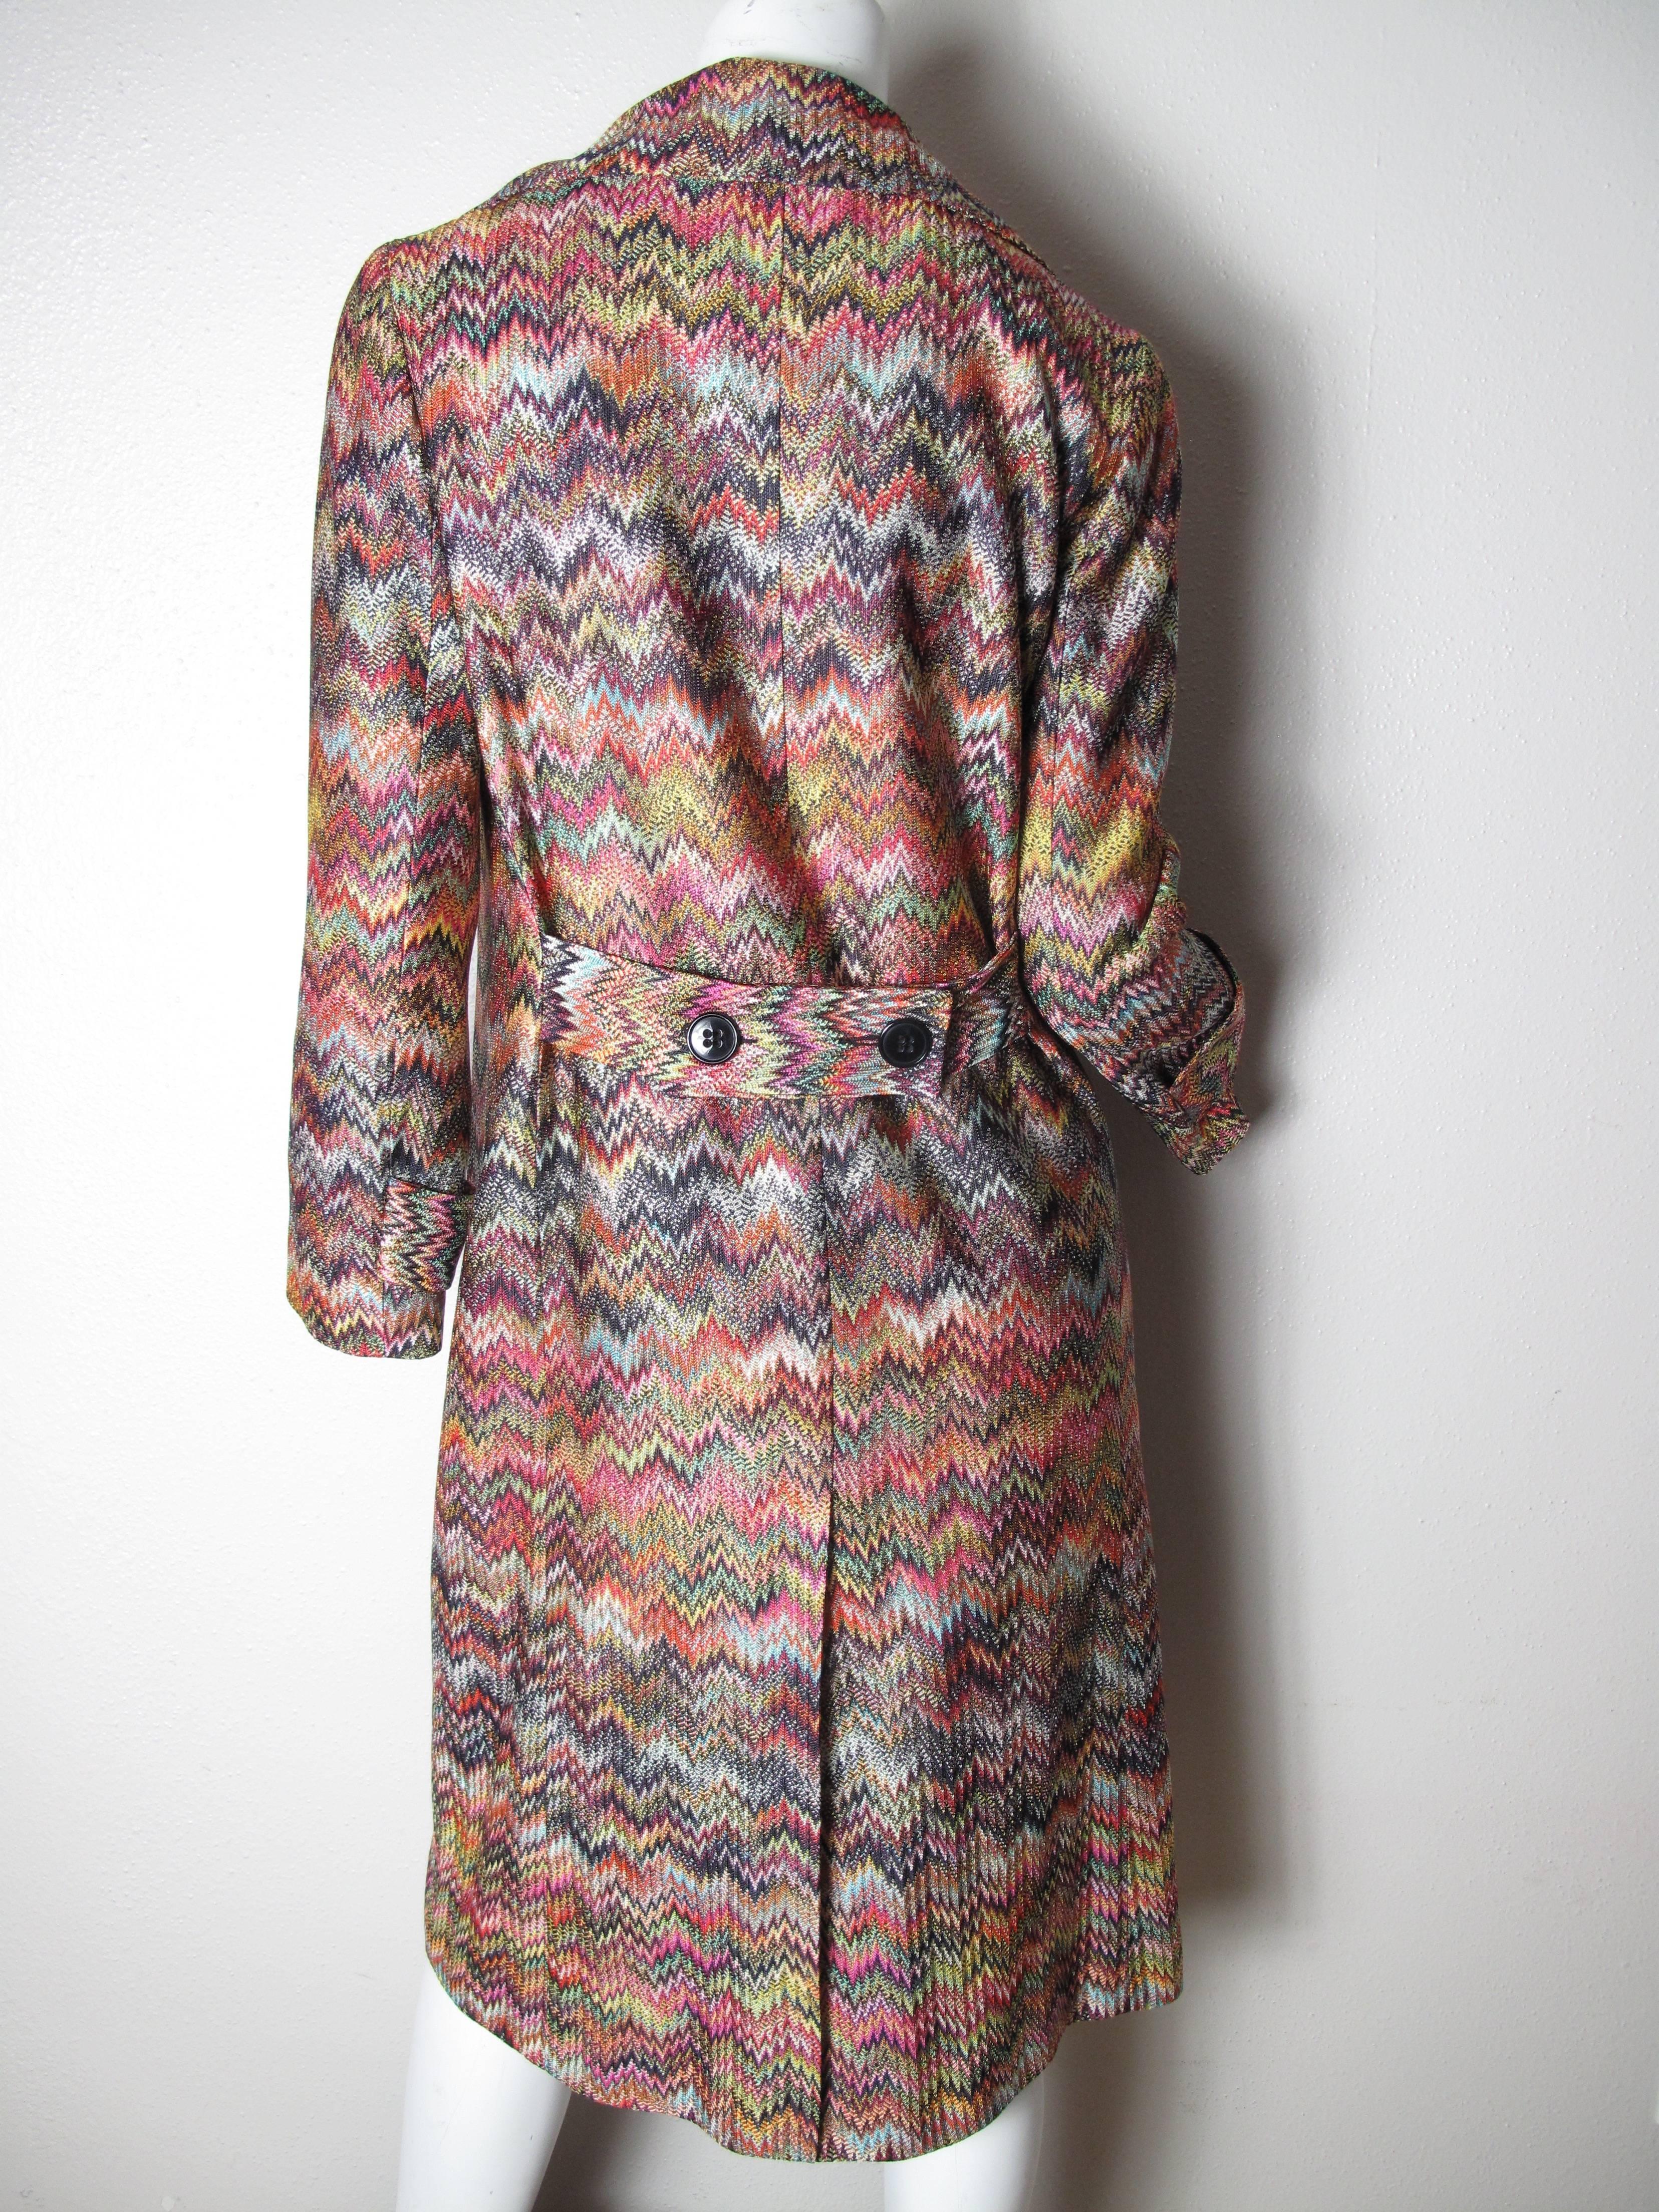 Missoni knit trench coat, buttons down front, two side pockets.  Condition: Excellent. Size 44

We accept returns for refund, please see our terms.  We offer free ground shipping within the US.  Please let us know if you have any questions.